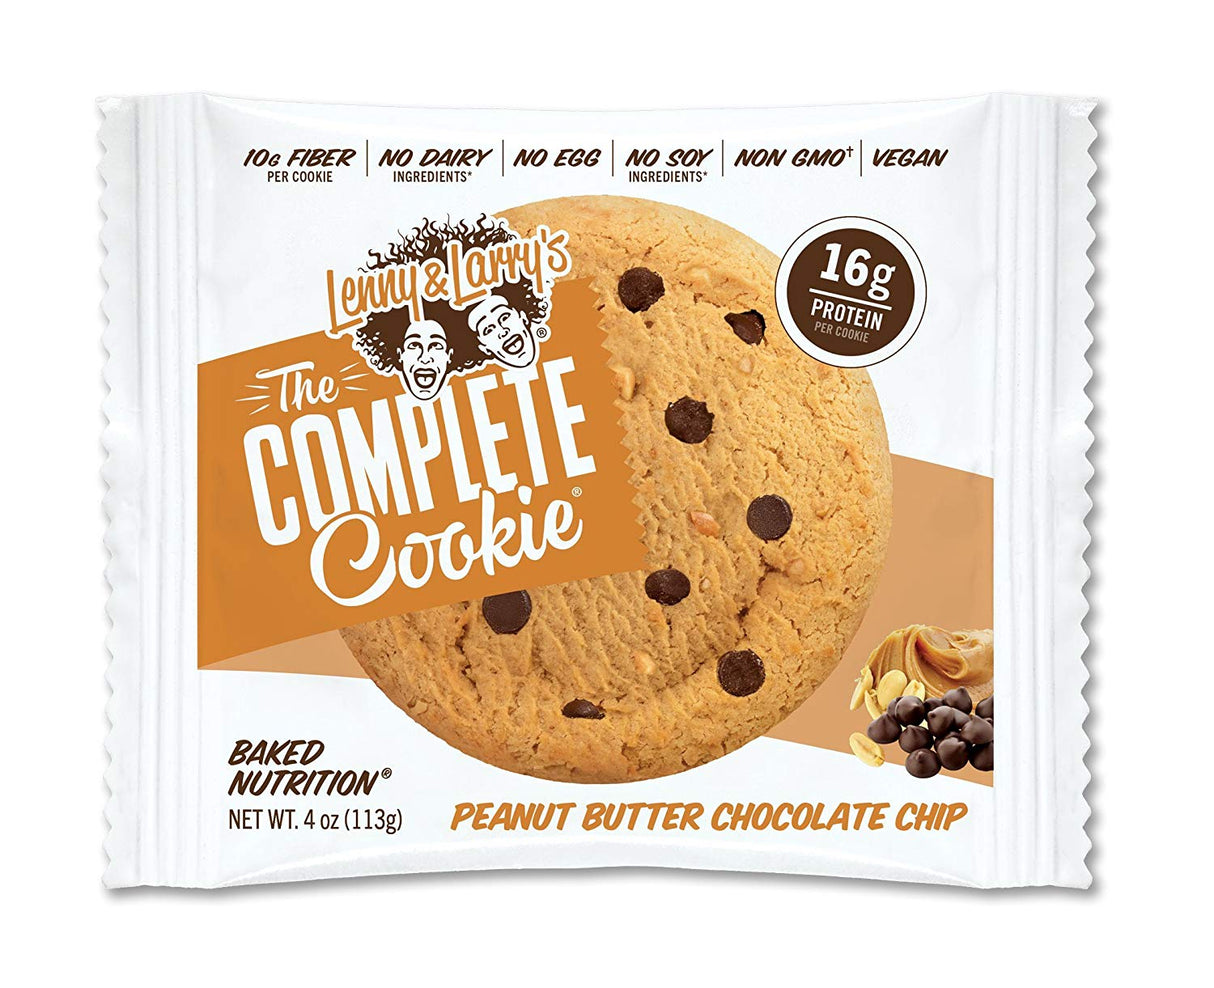 The Complete Cookie 12 x 113g Peanutbutter Chocolate Chip